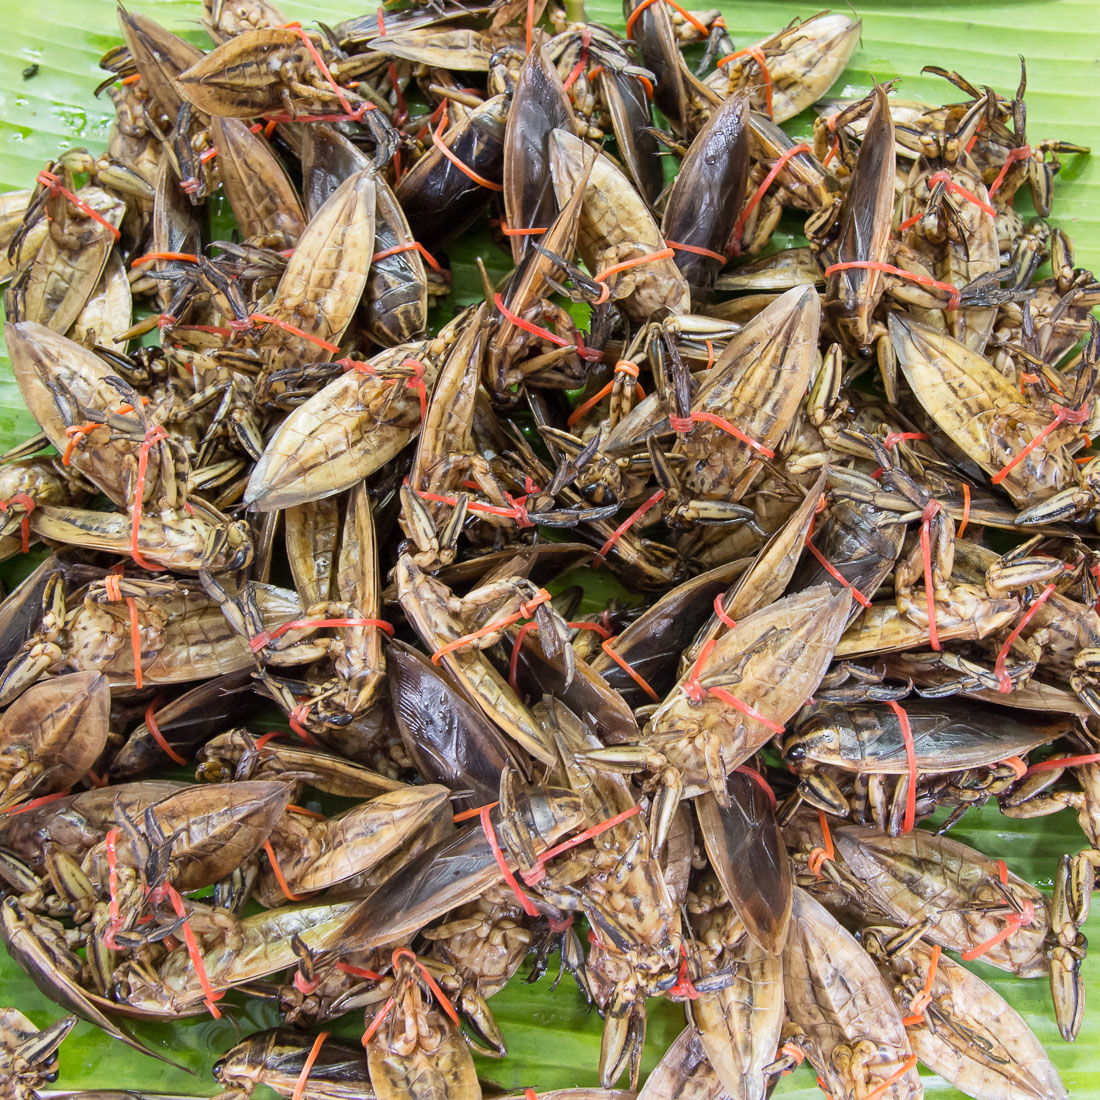 Fried gigantic water bugs for sale at the market in Thoen district, Kingdom of Thailand, Indochina, South East Asia.